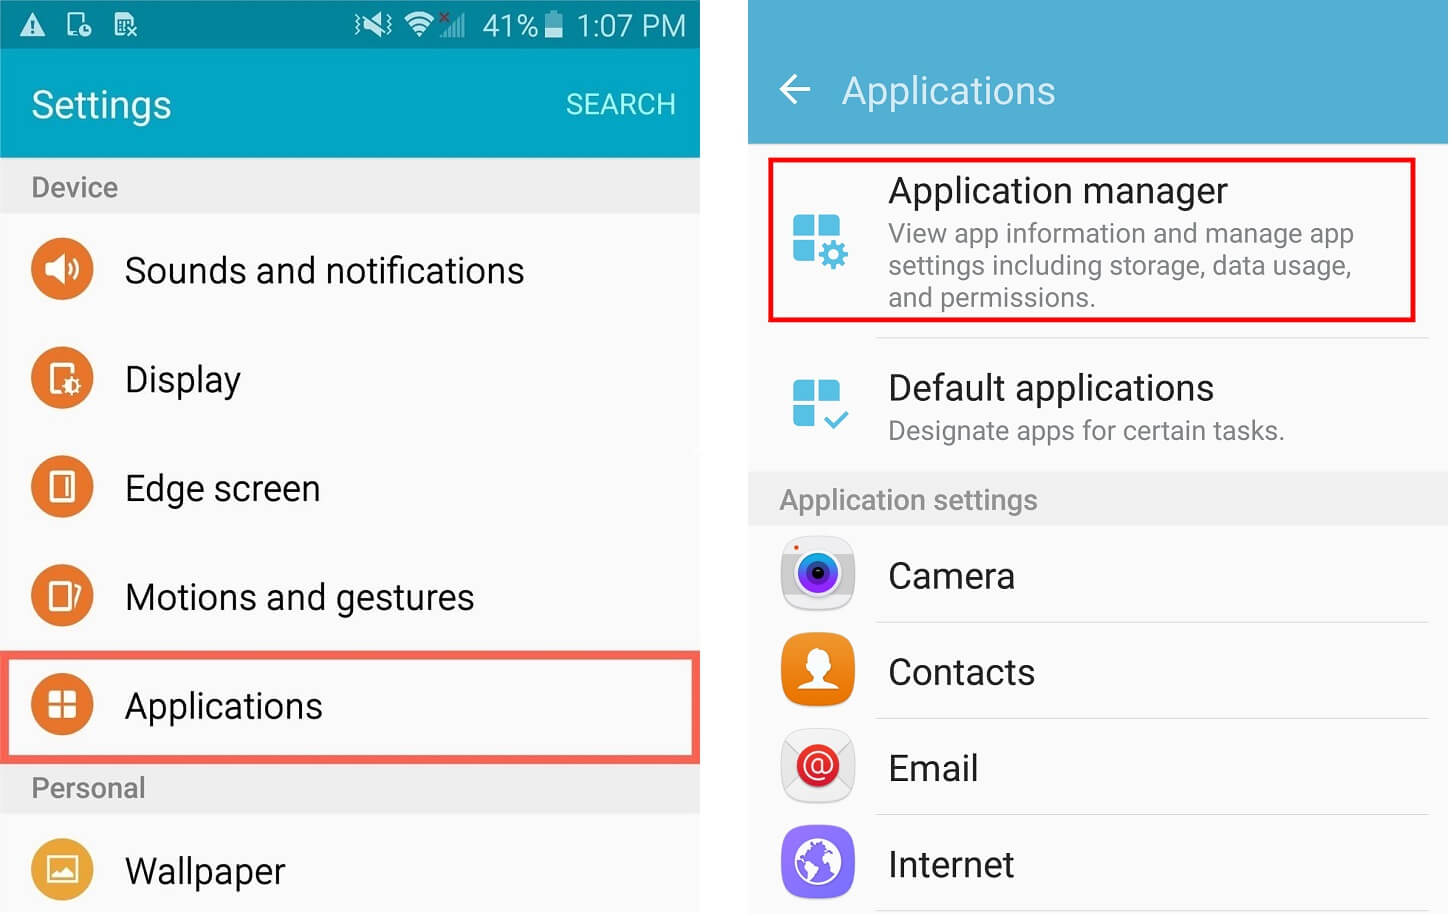 Tap on Applications and then click on the Application manager